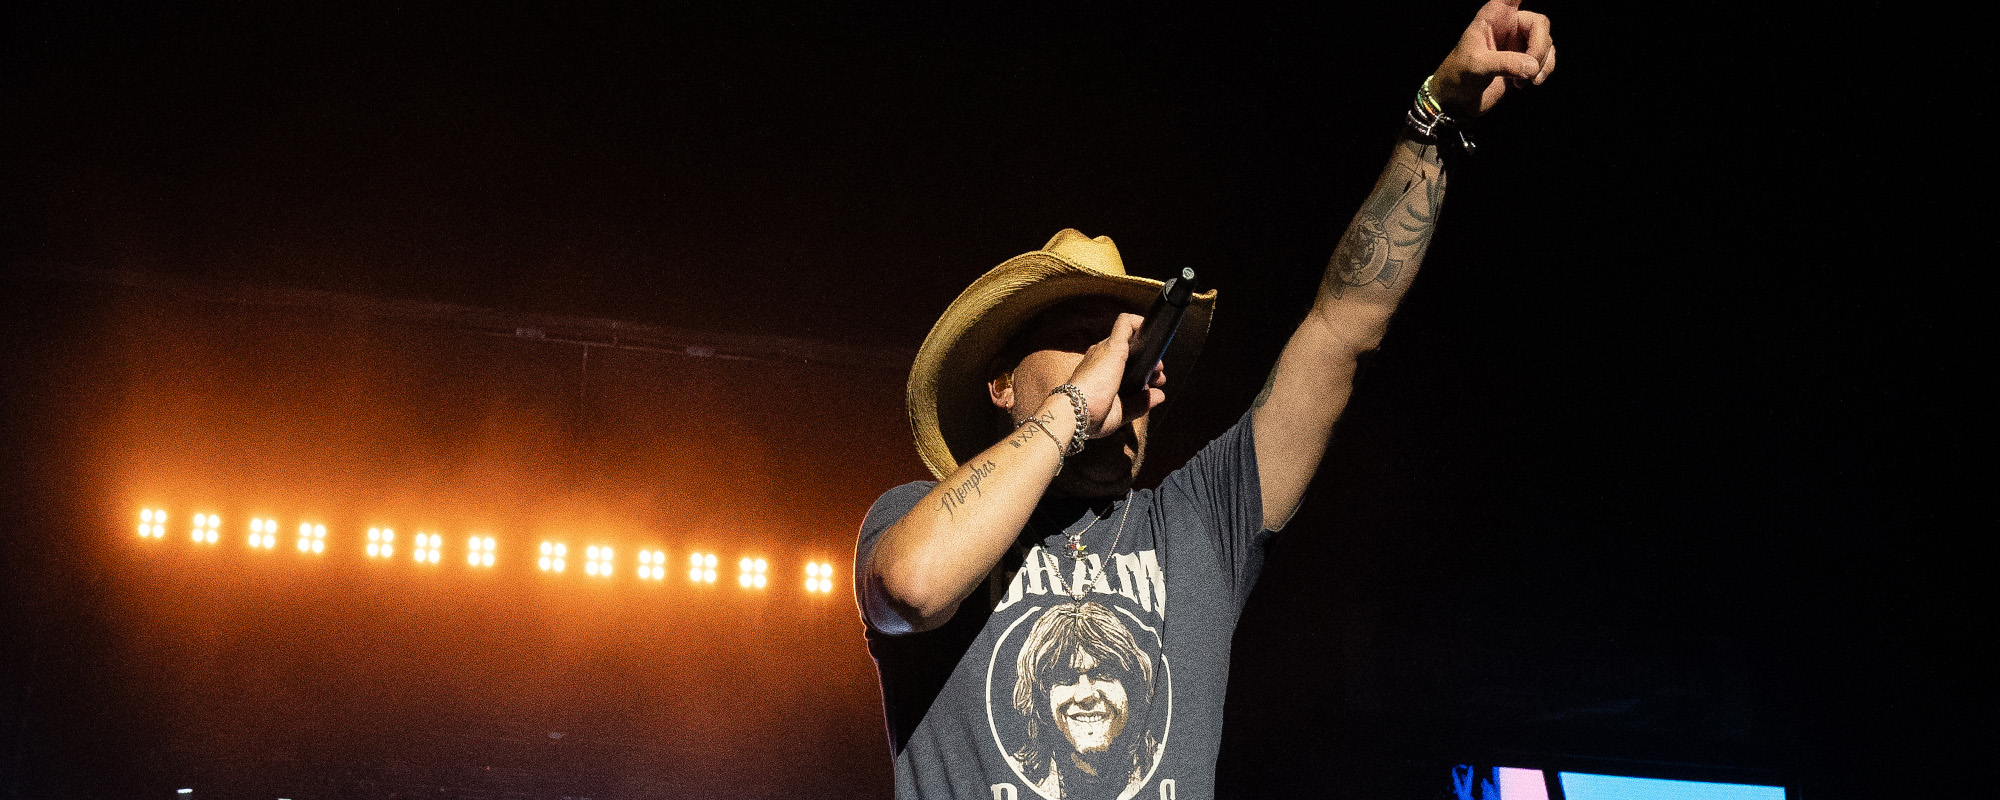 5 Songs You Didn’t Know Feature Jason Aldean